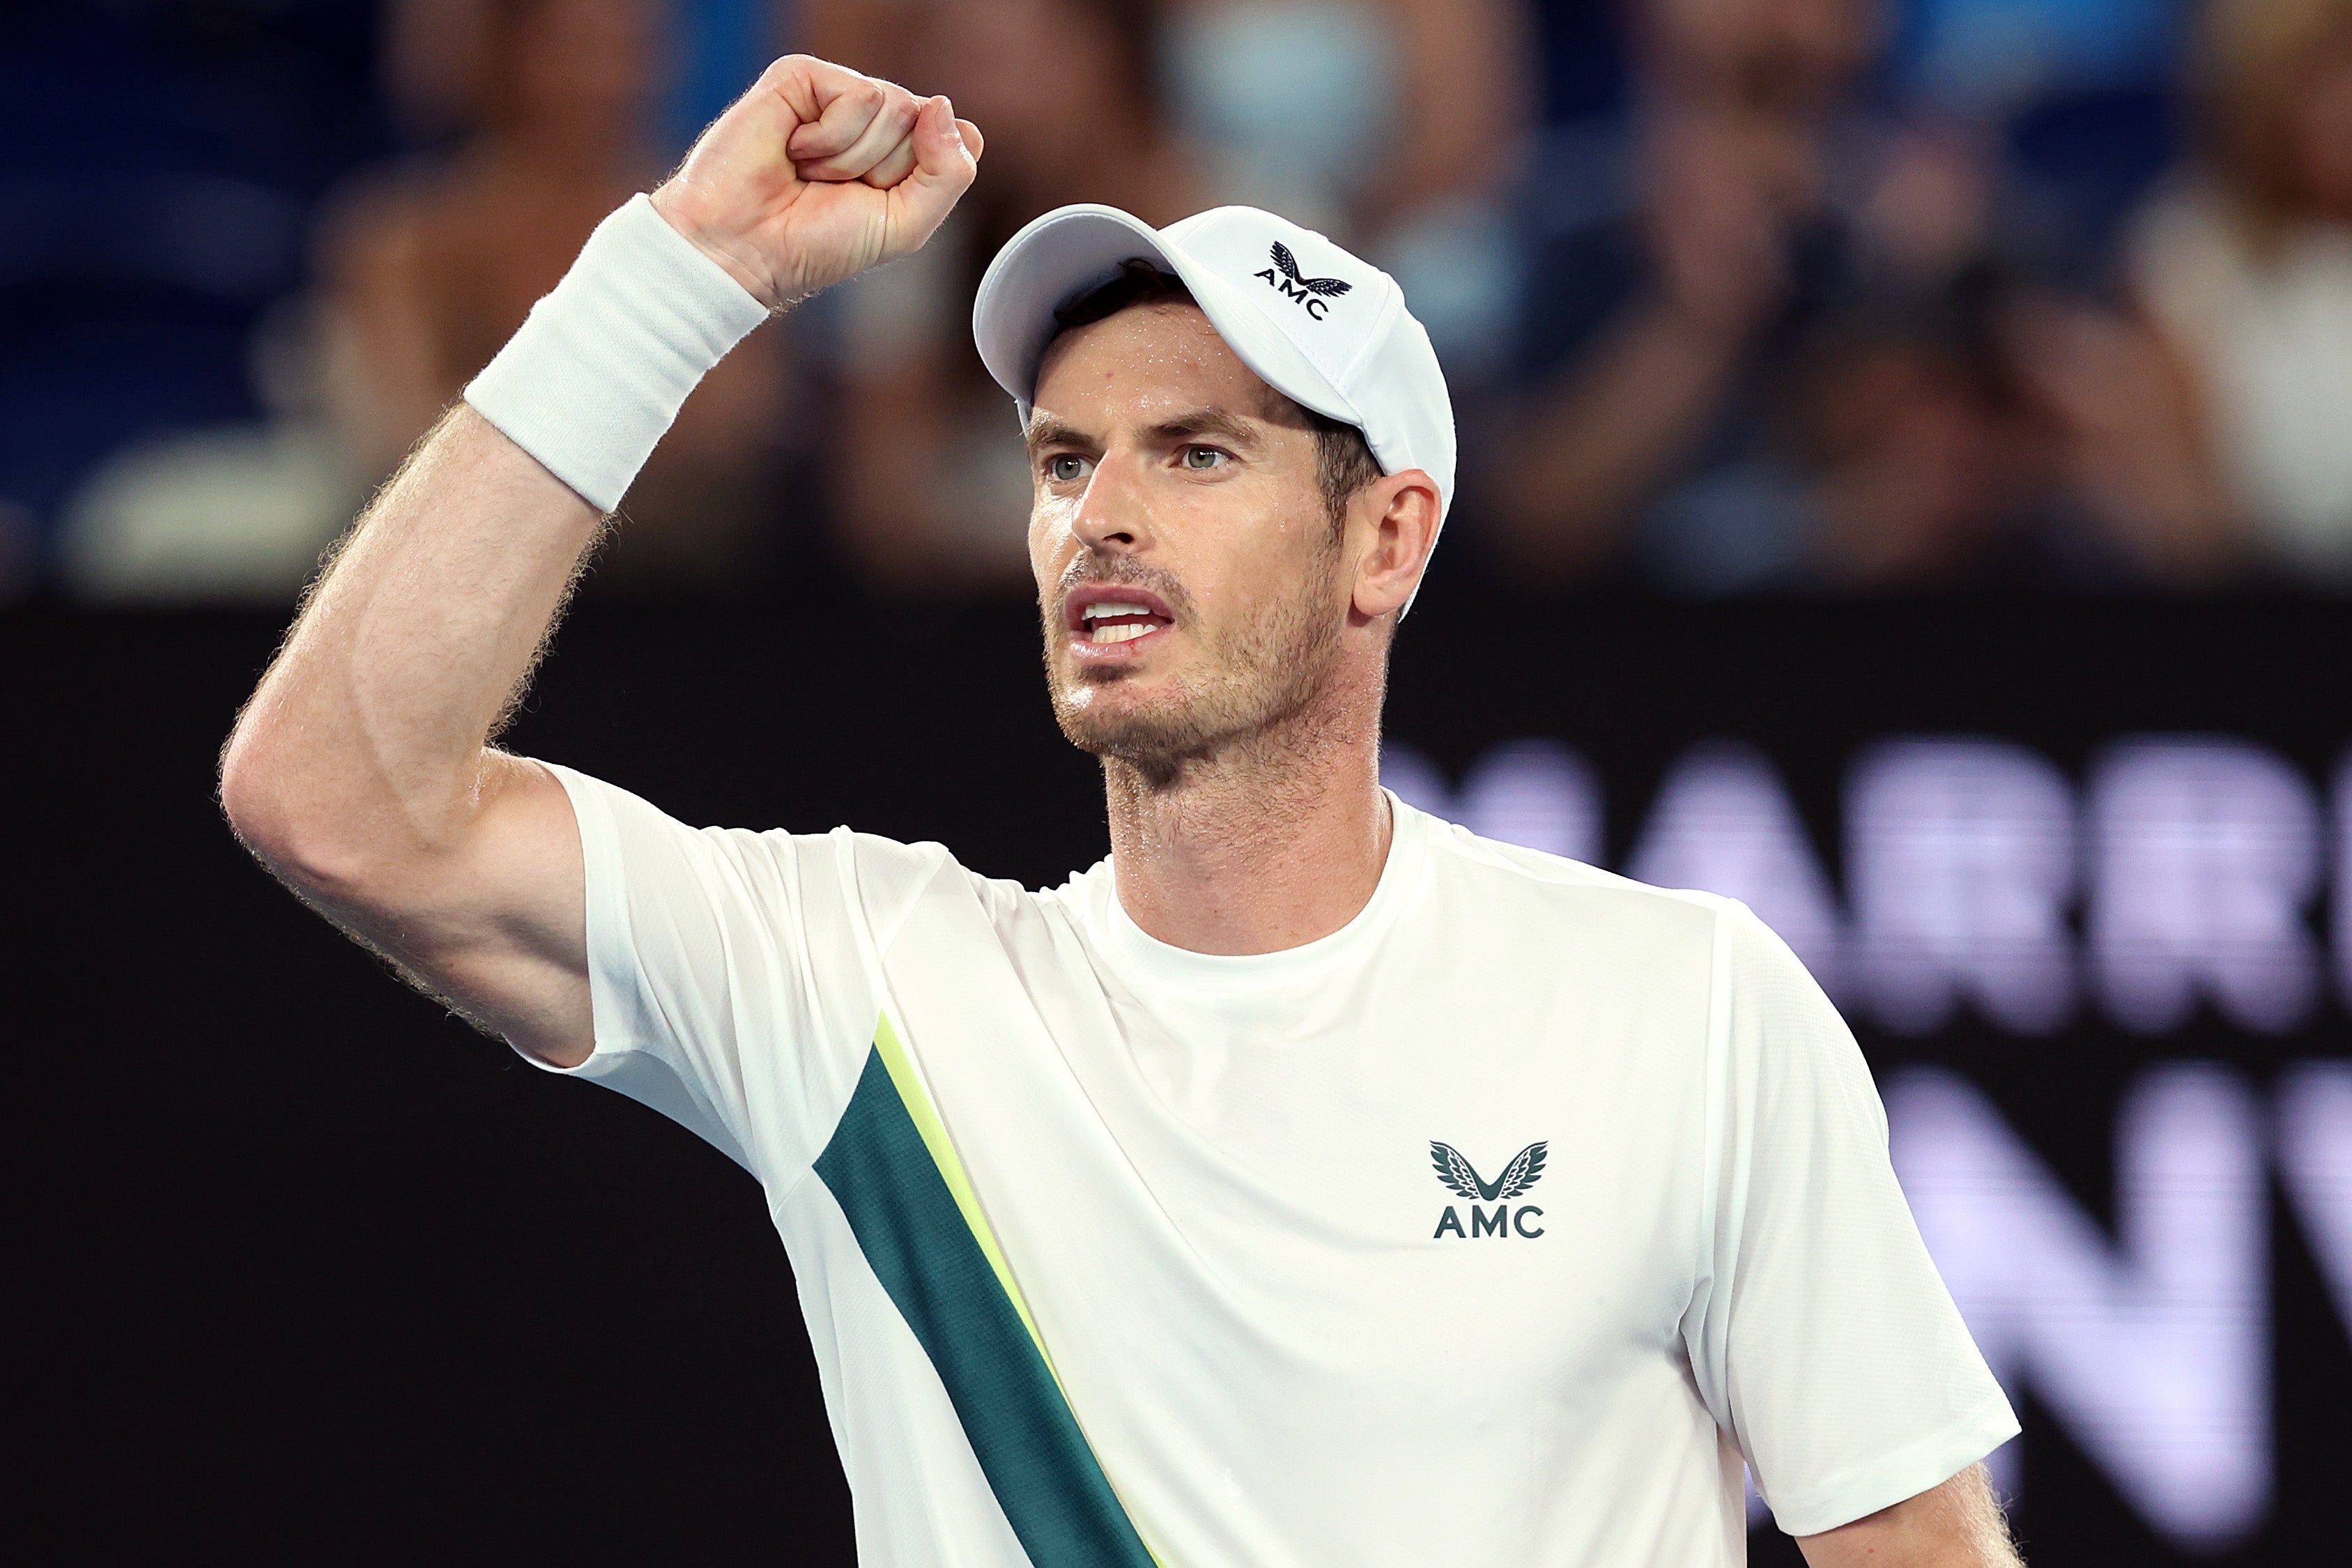 Australian Open 2023 Who does Andy Murray play next? The Independent